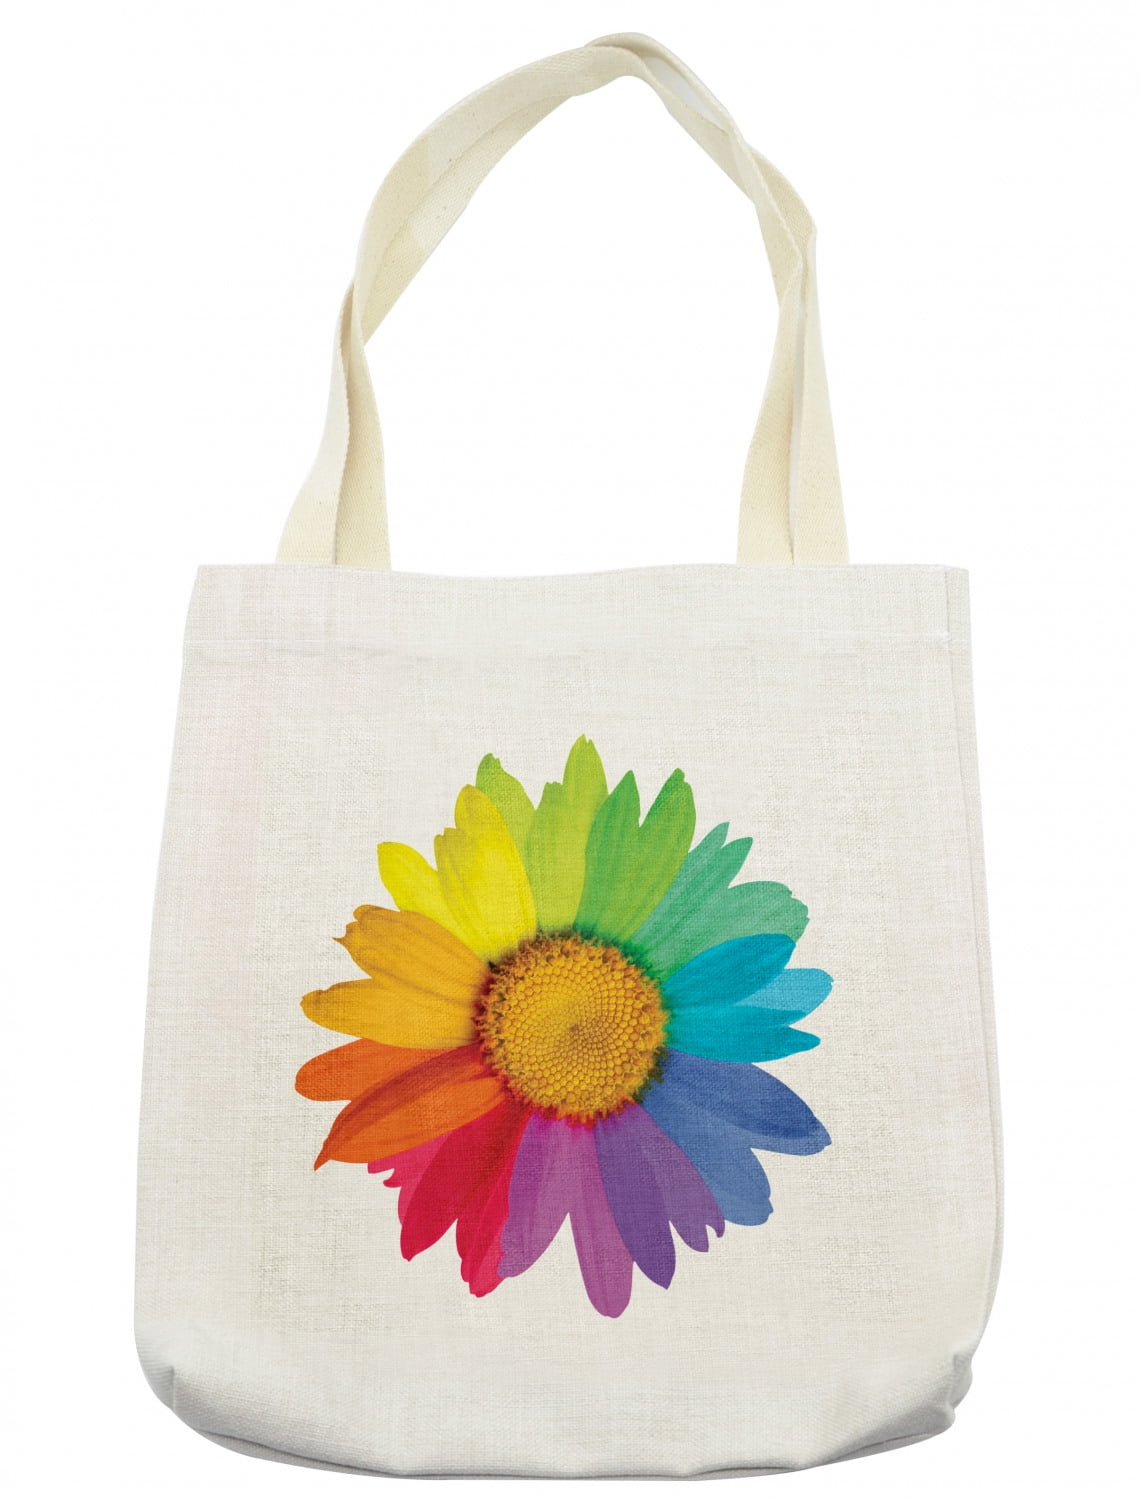 Flower Tote Bag, Rainbow Colored Sunflower or Daisy Spring Inspired Image Hippie Style Modern Design, Cloth Linen Reusable Bag for Shopping Books